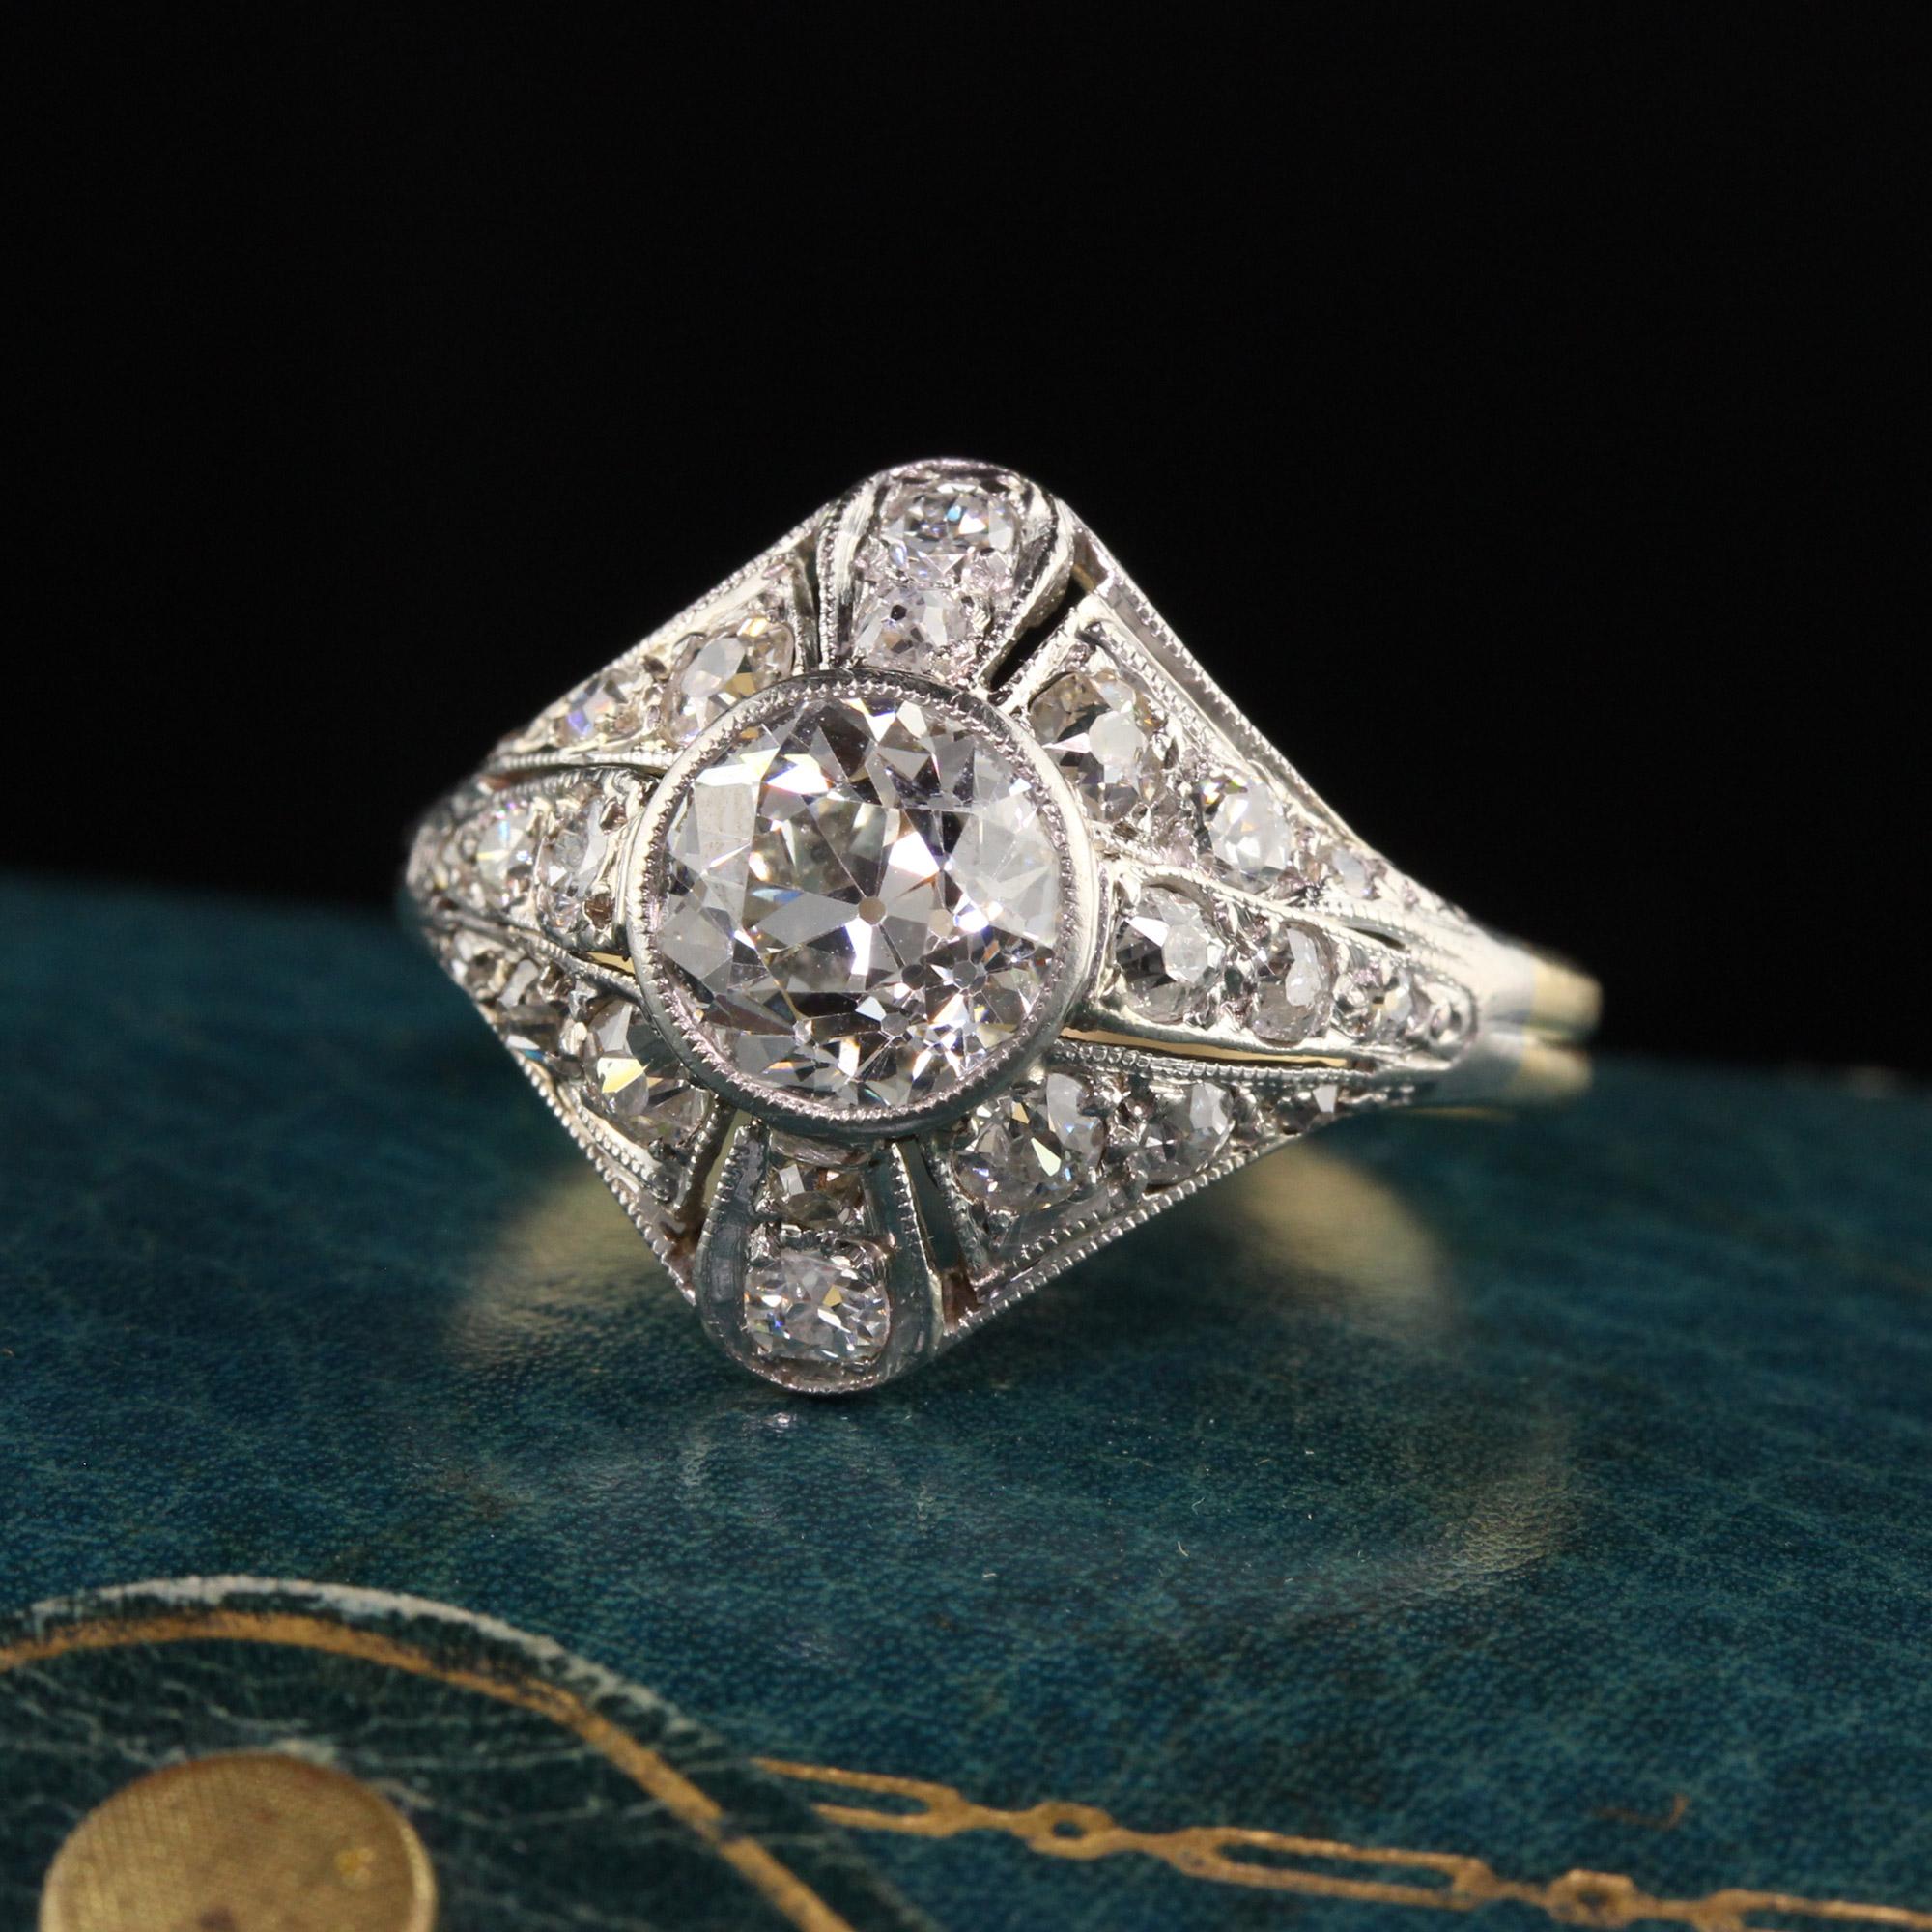 Beautiful Antique Art Deco Platinum and Yellow Gold Old European Diamond Engagement Ring. This magnificent engagement ring is crafted in platinum and 18k yellow gold grooved shank. The center is an bright and white old European cut diamond and is